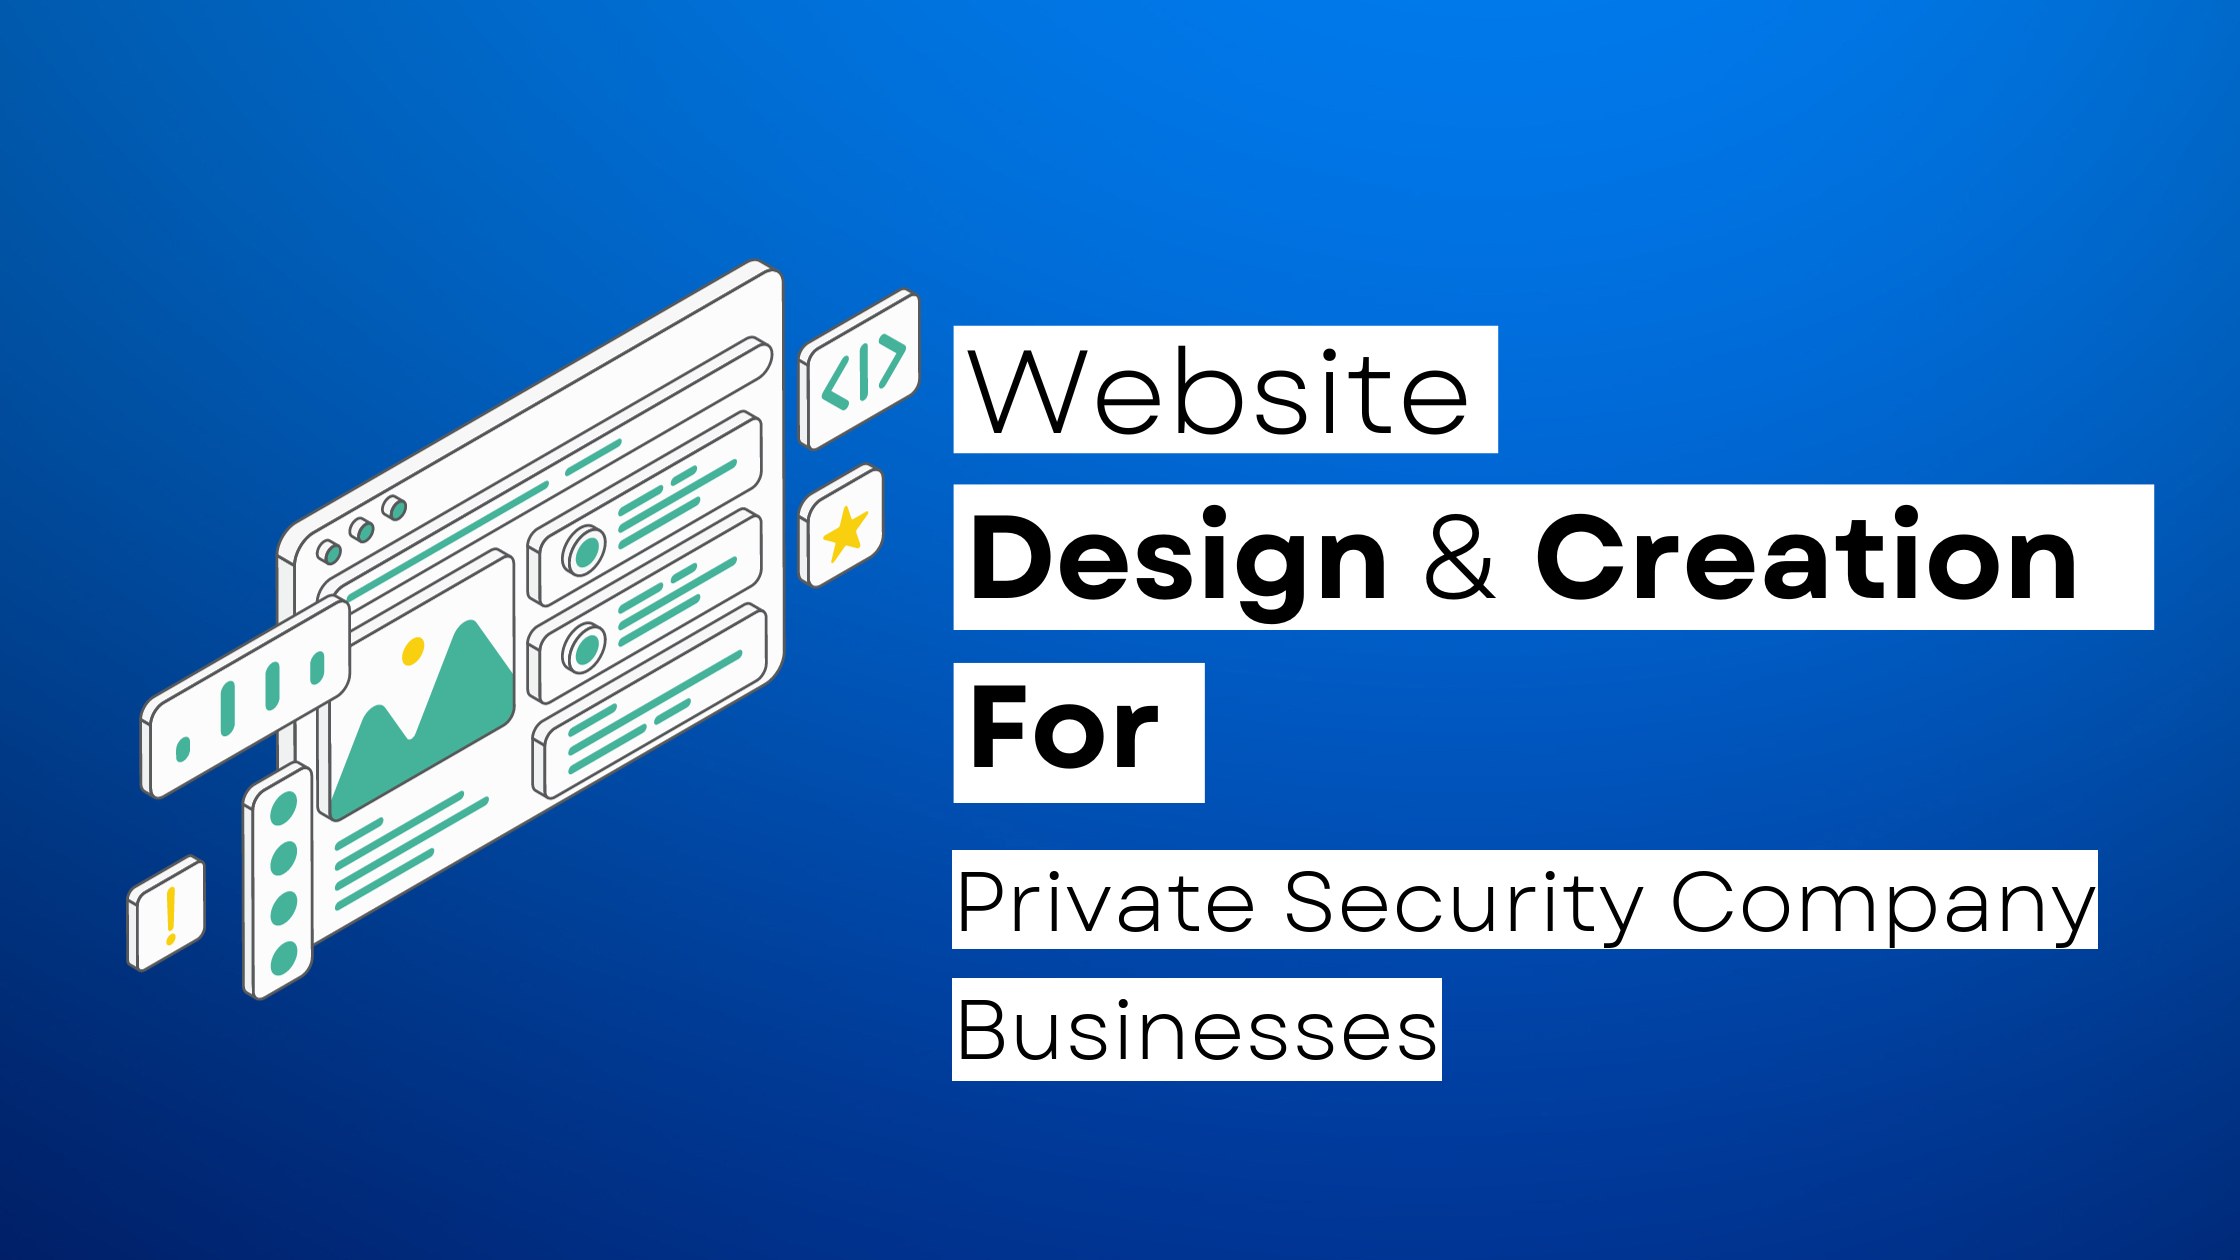 How to start a Private Security Company website